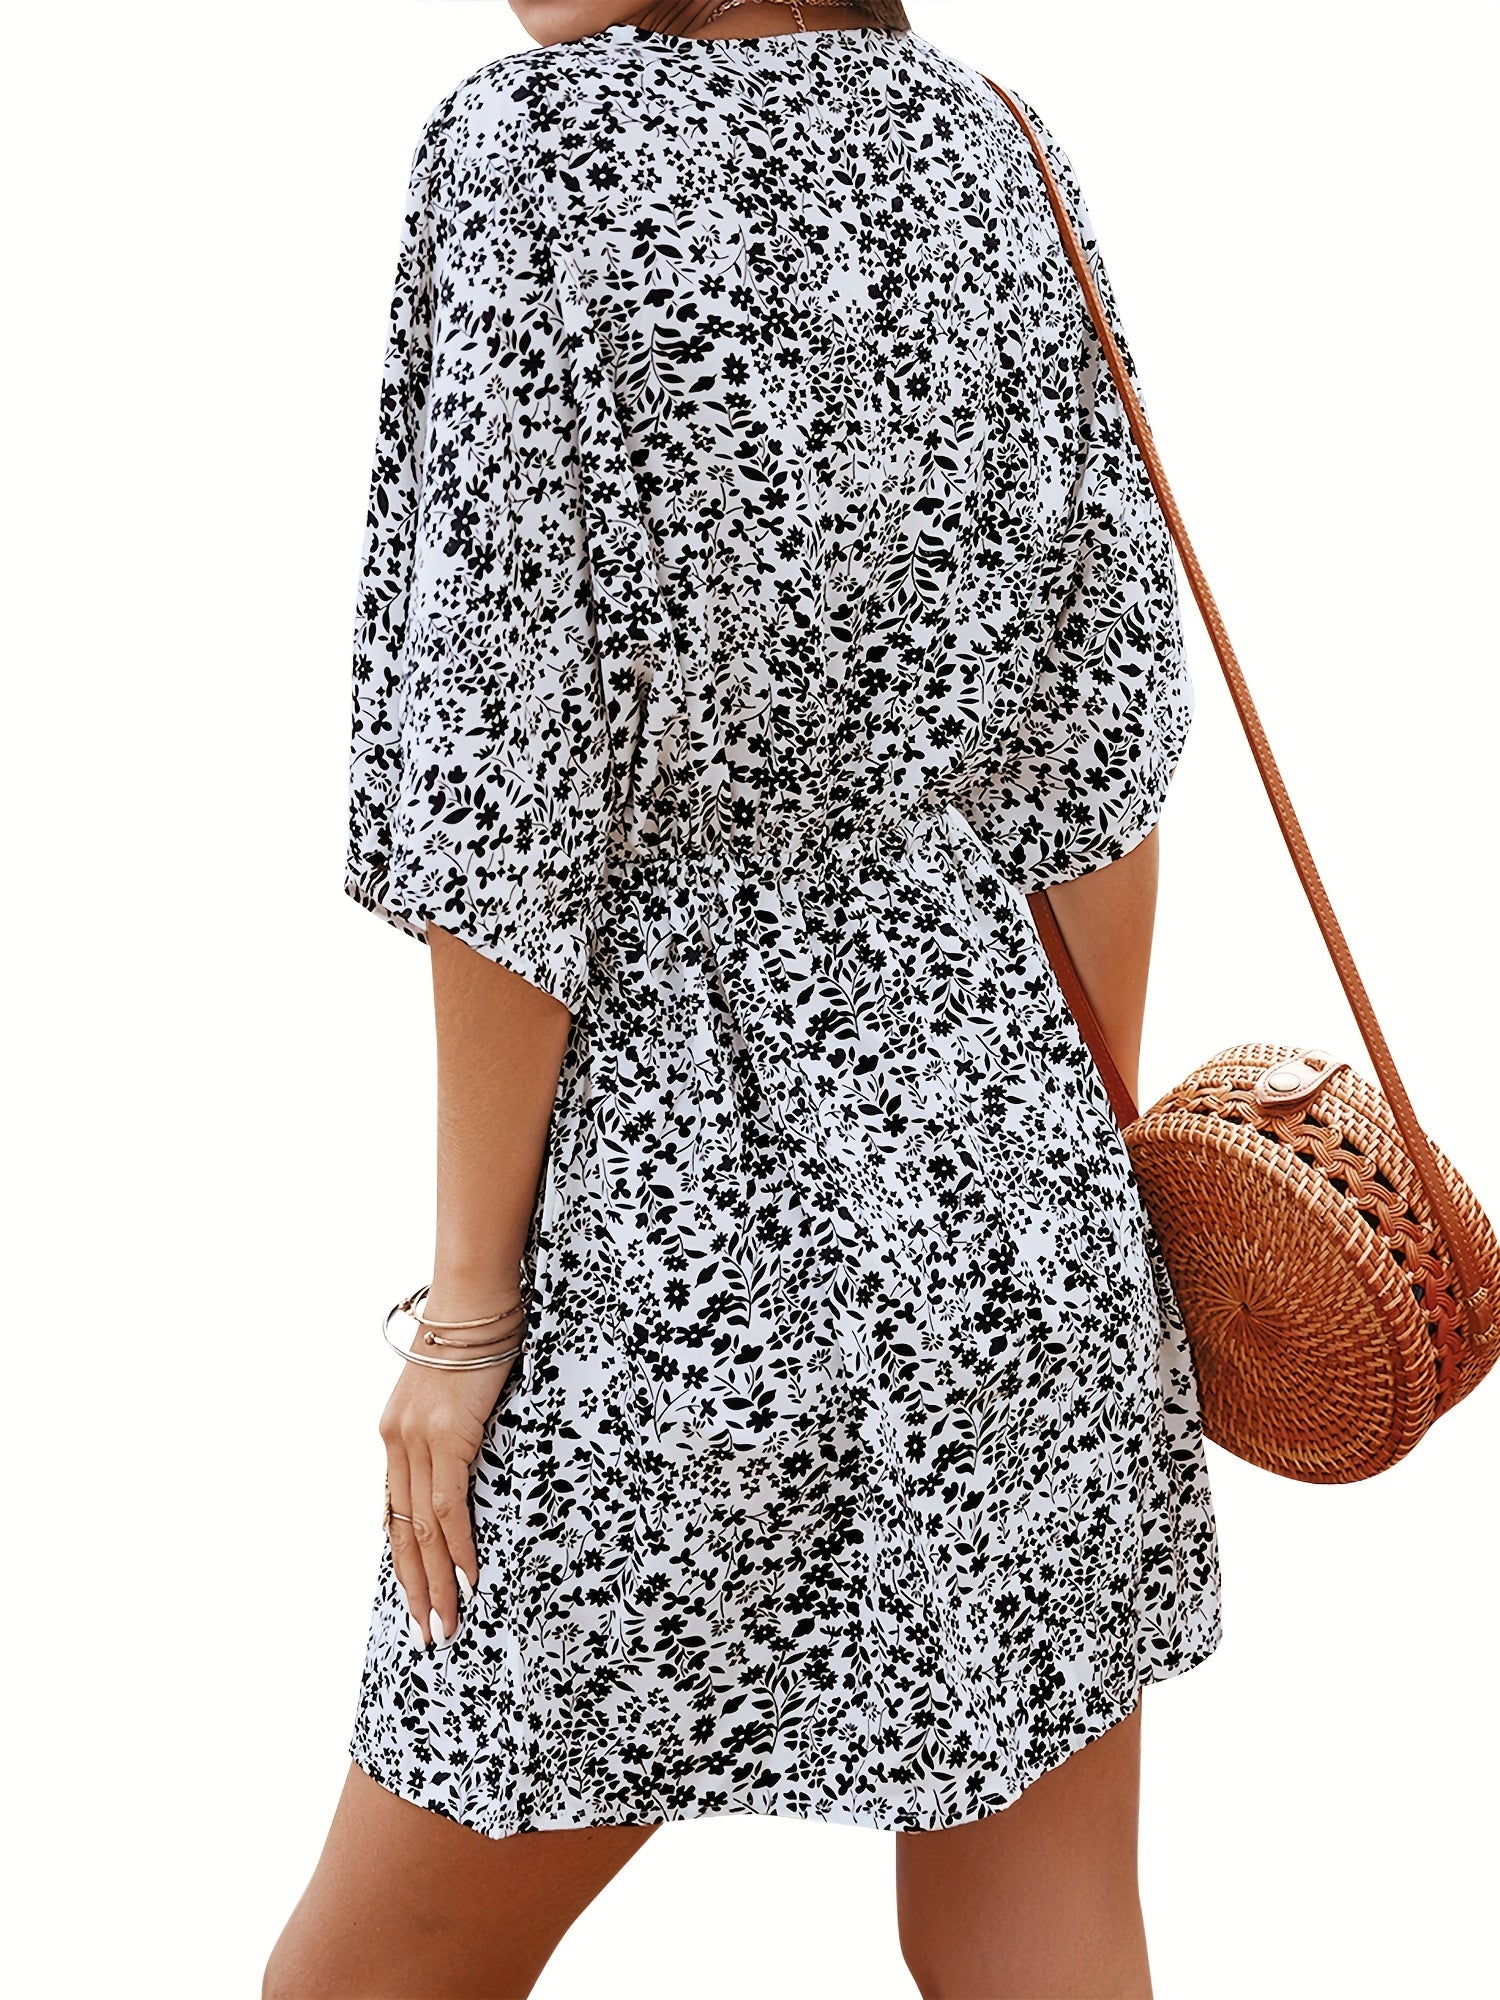 Floral Print V Neck Button Front Dress, Casual Loose Sleeve Dress For Summer, Women's Clothing